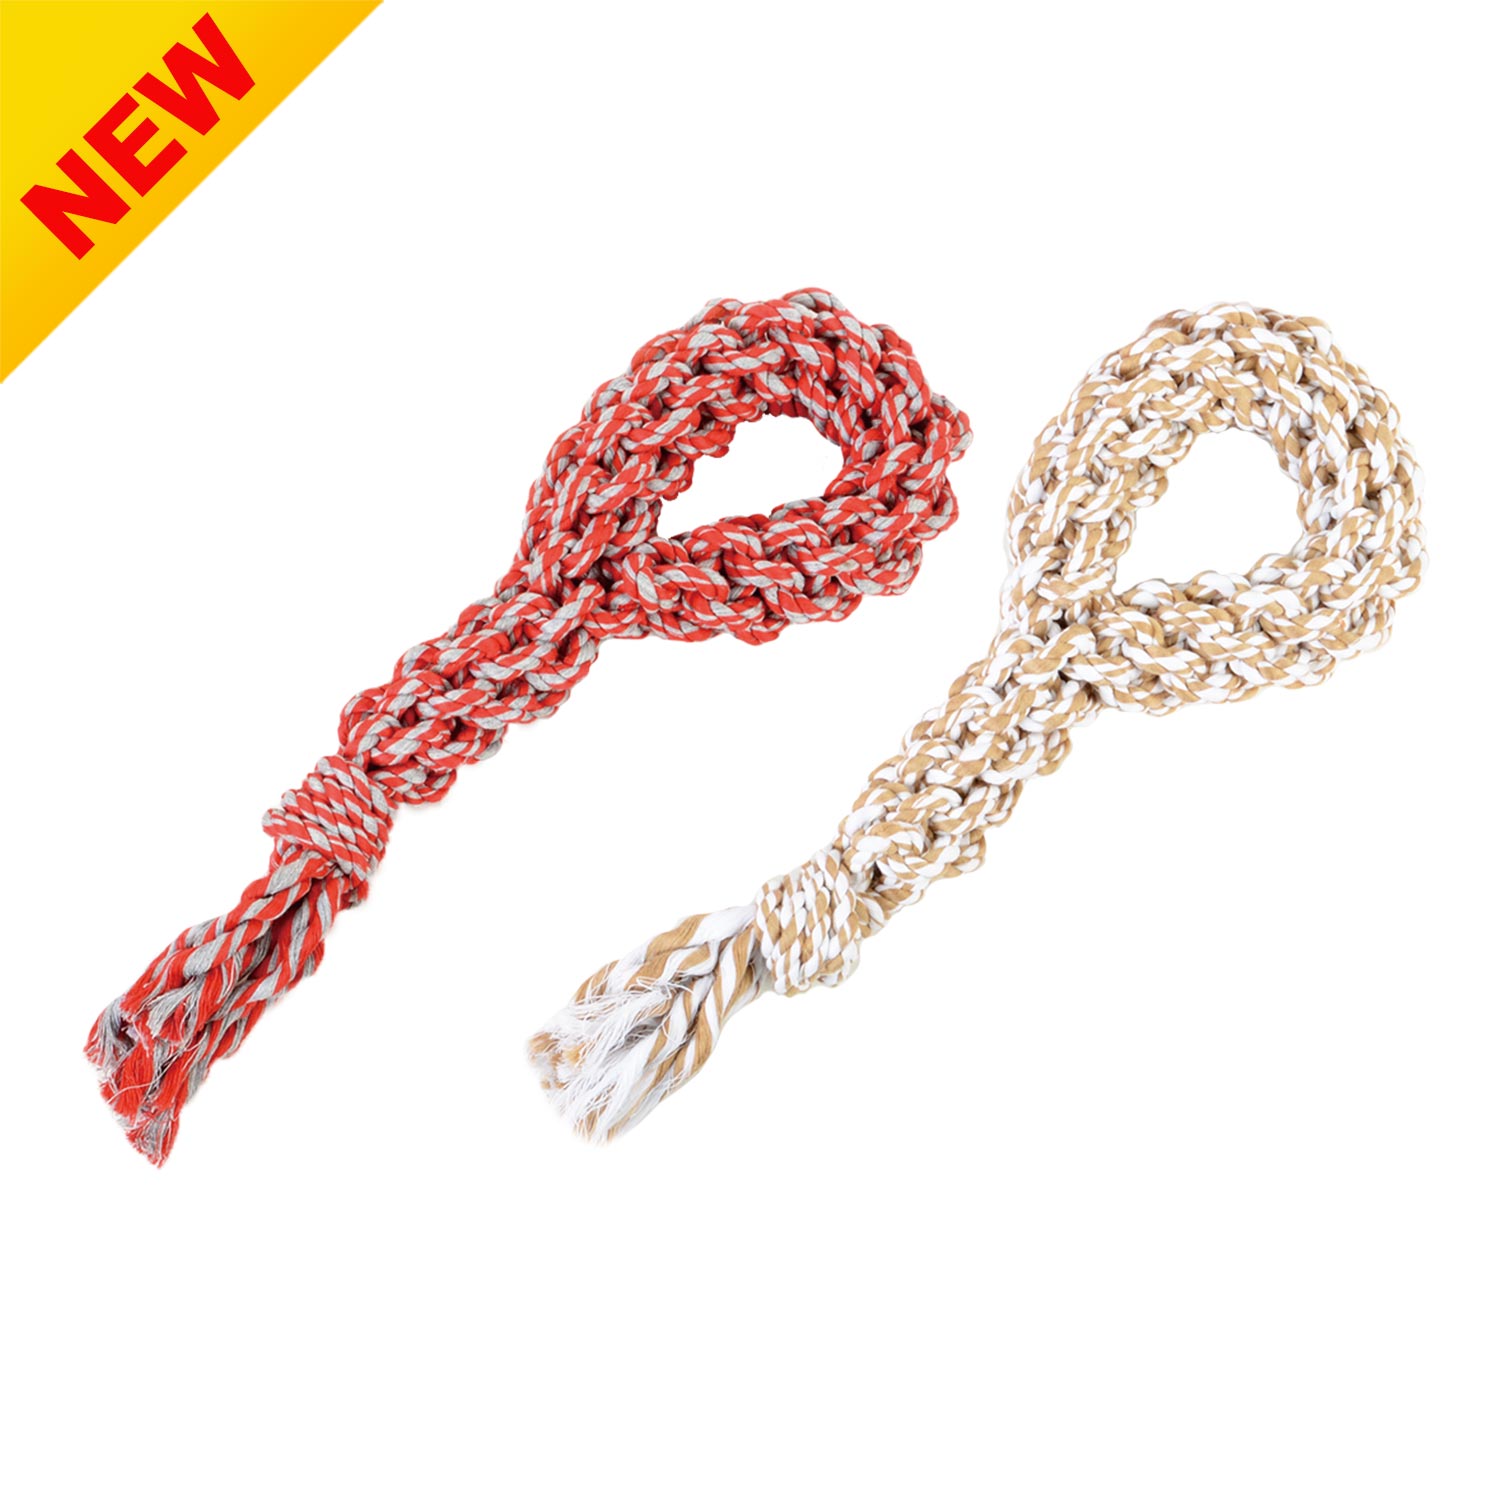 Cotton Braided Rope Dog toy